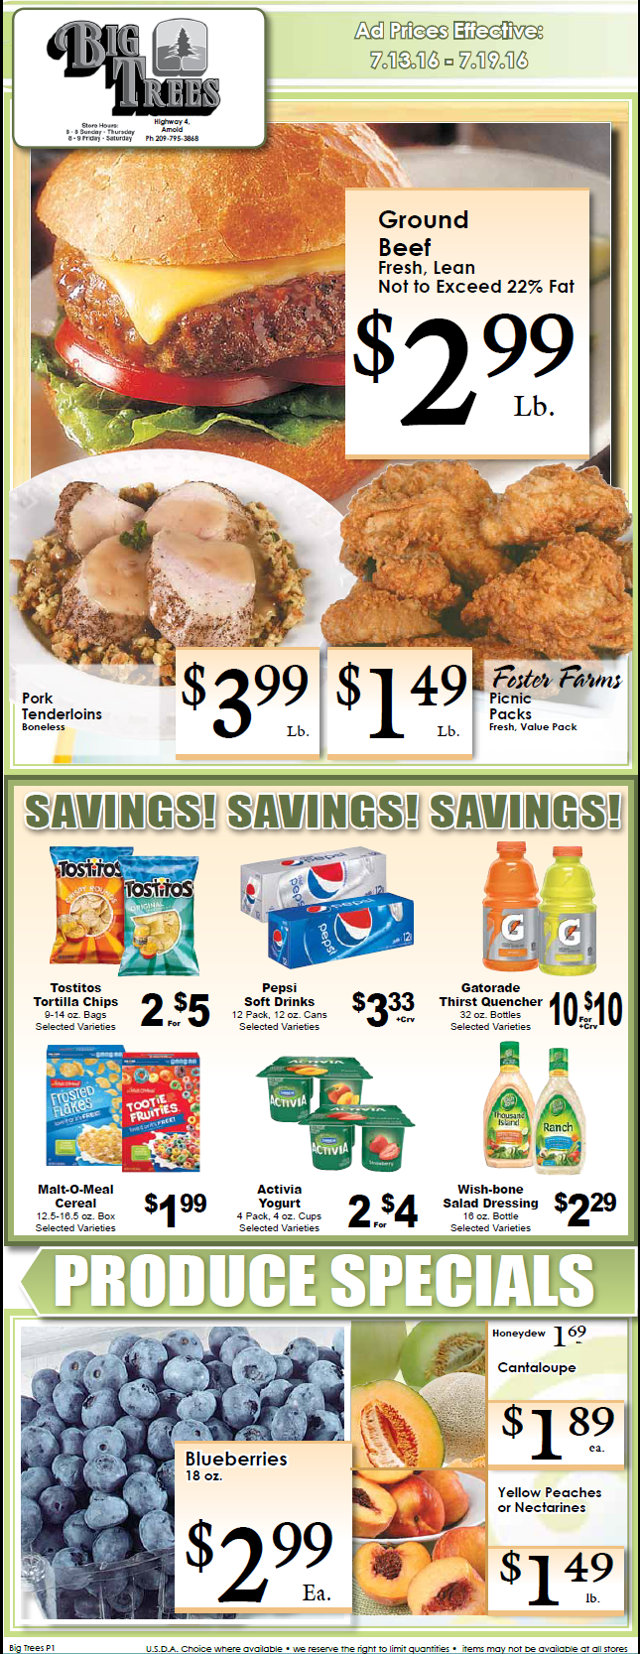 Big Trees Market Weekly Specials & Grocery Ad Through July 19th